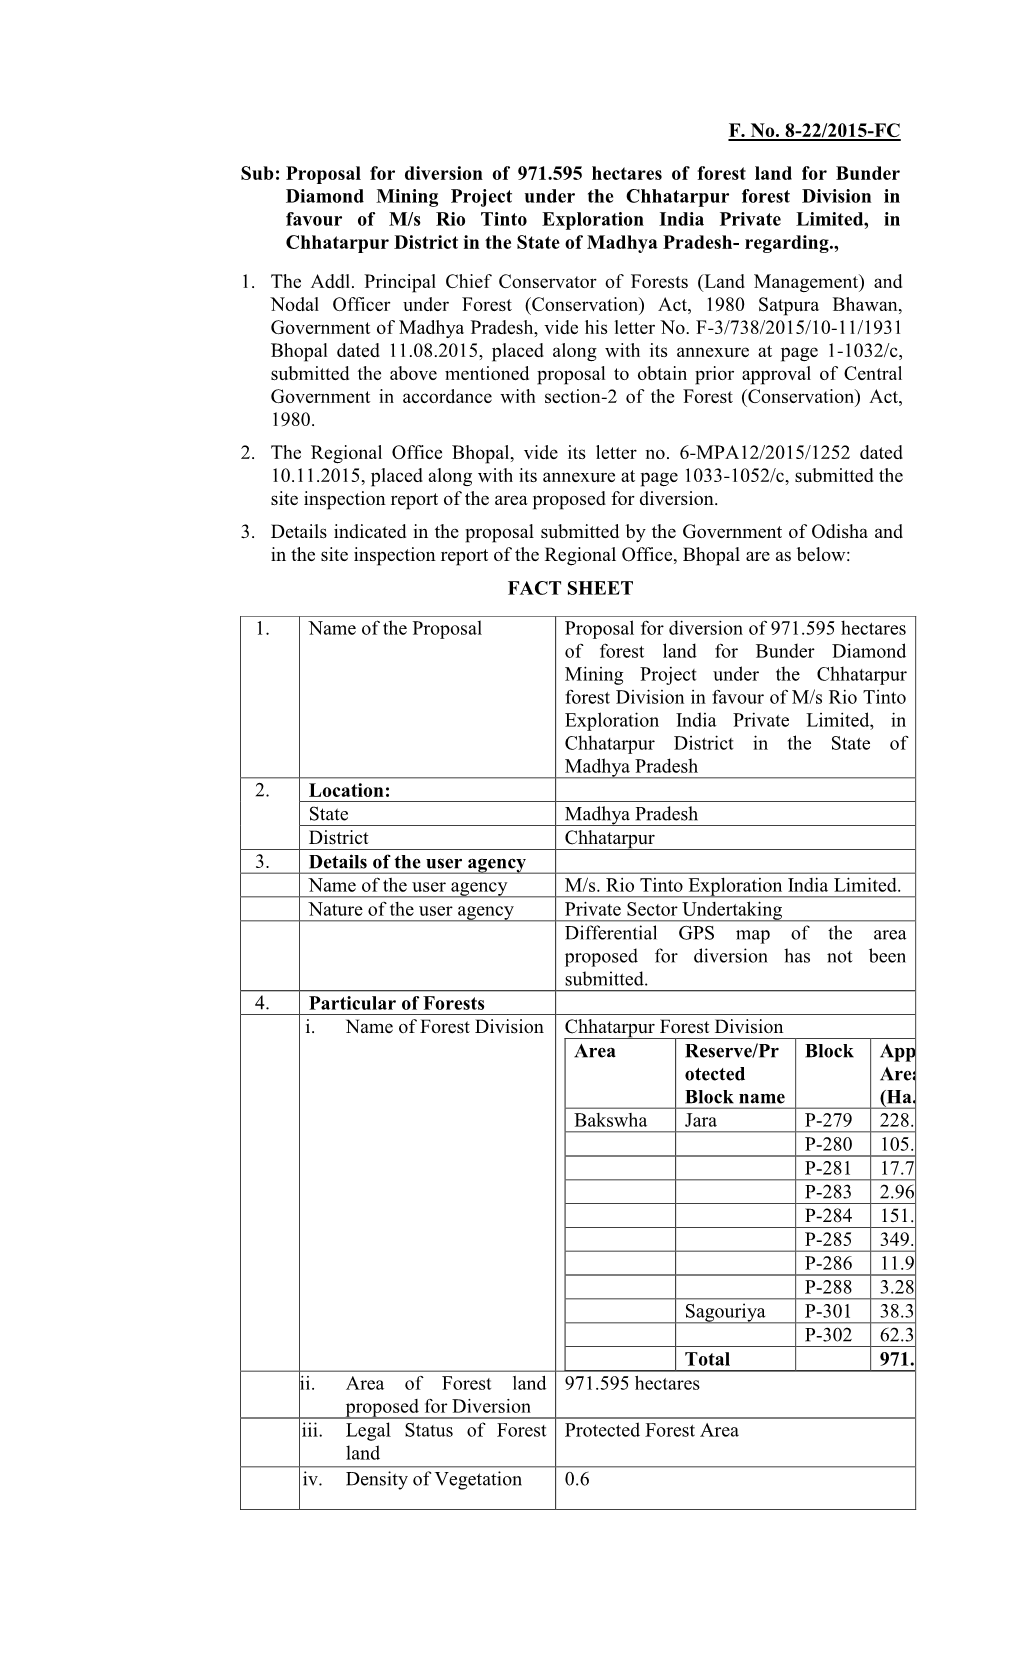 F. No. 8-22/2015-FC Sub: Proposal for Diversion of 971.595 Hectares of Forest Land for Bunder Diamond Mining Project Under the C